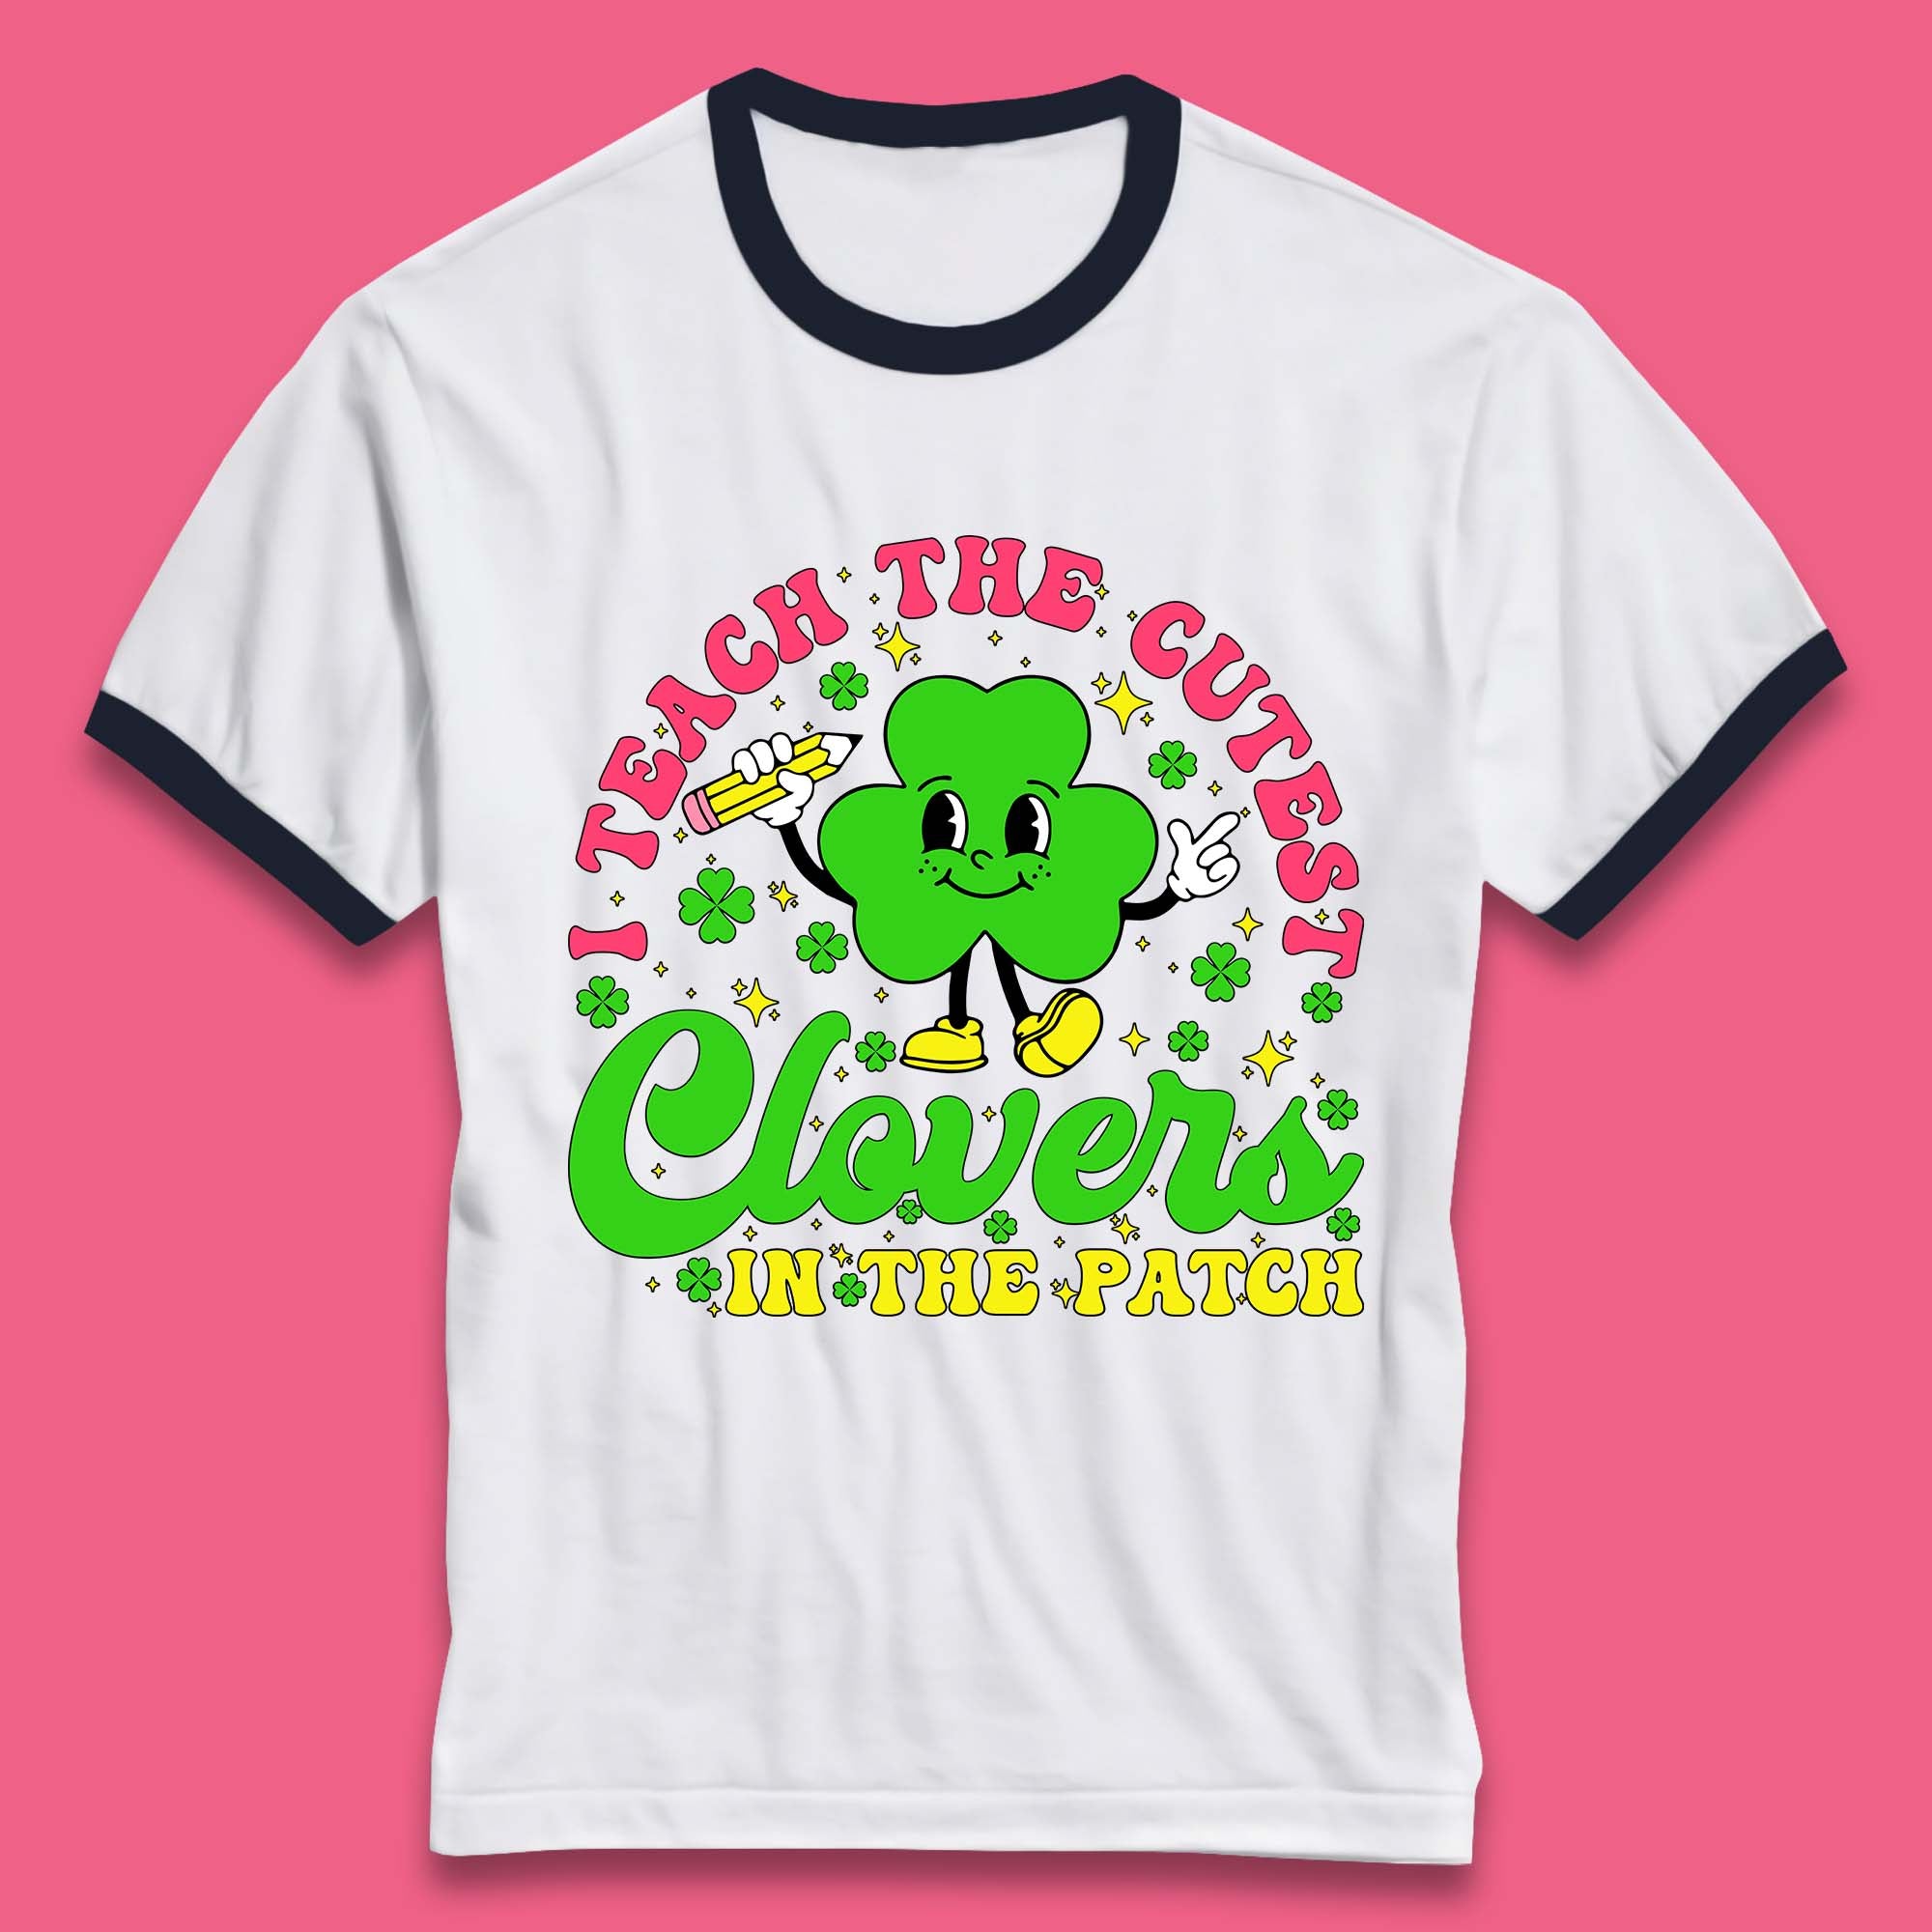 I Teach The Cutest Clovers In The Patch Ringer T-Shirt